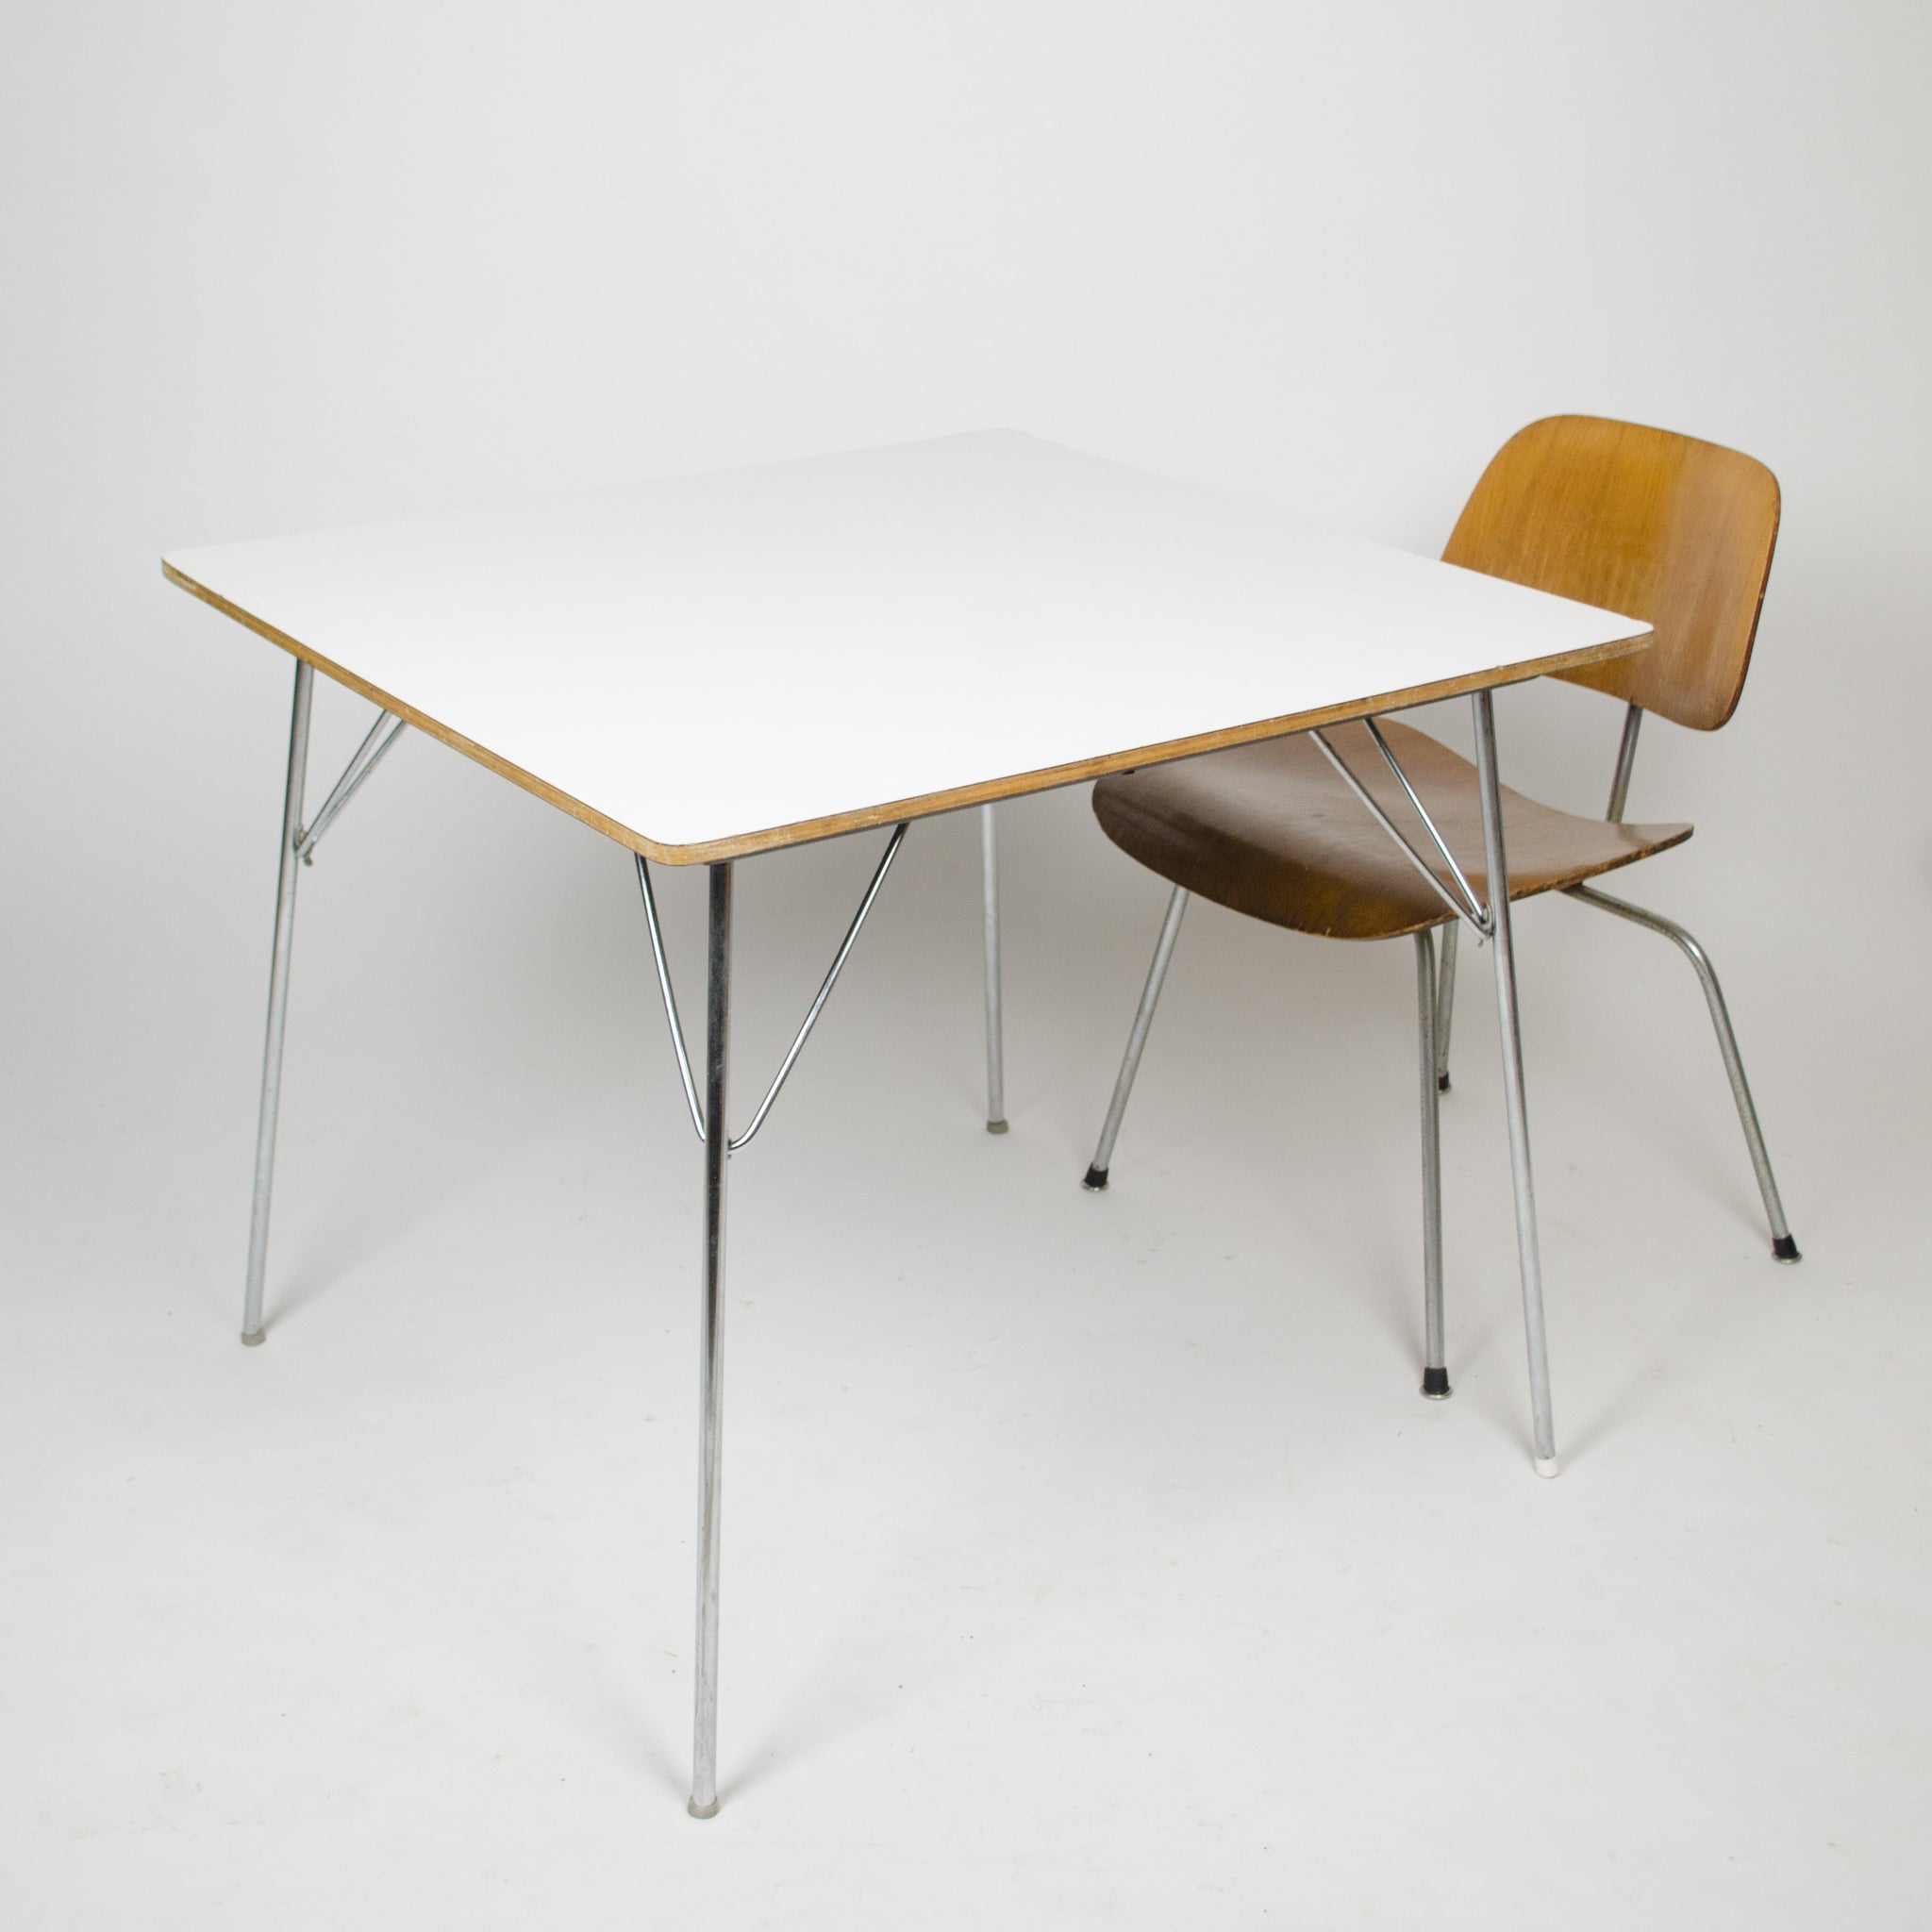 SOLD Eames Herman Miller Folding DTM 20 Square Dining Table Museum Quality